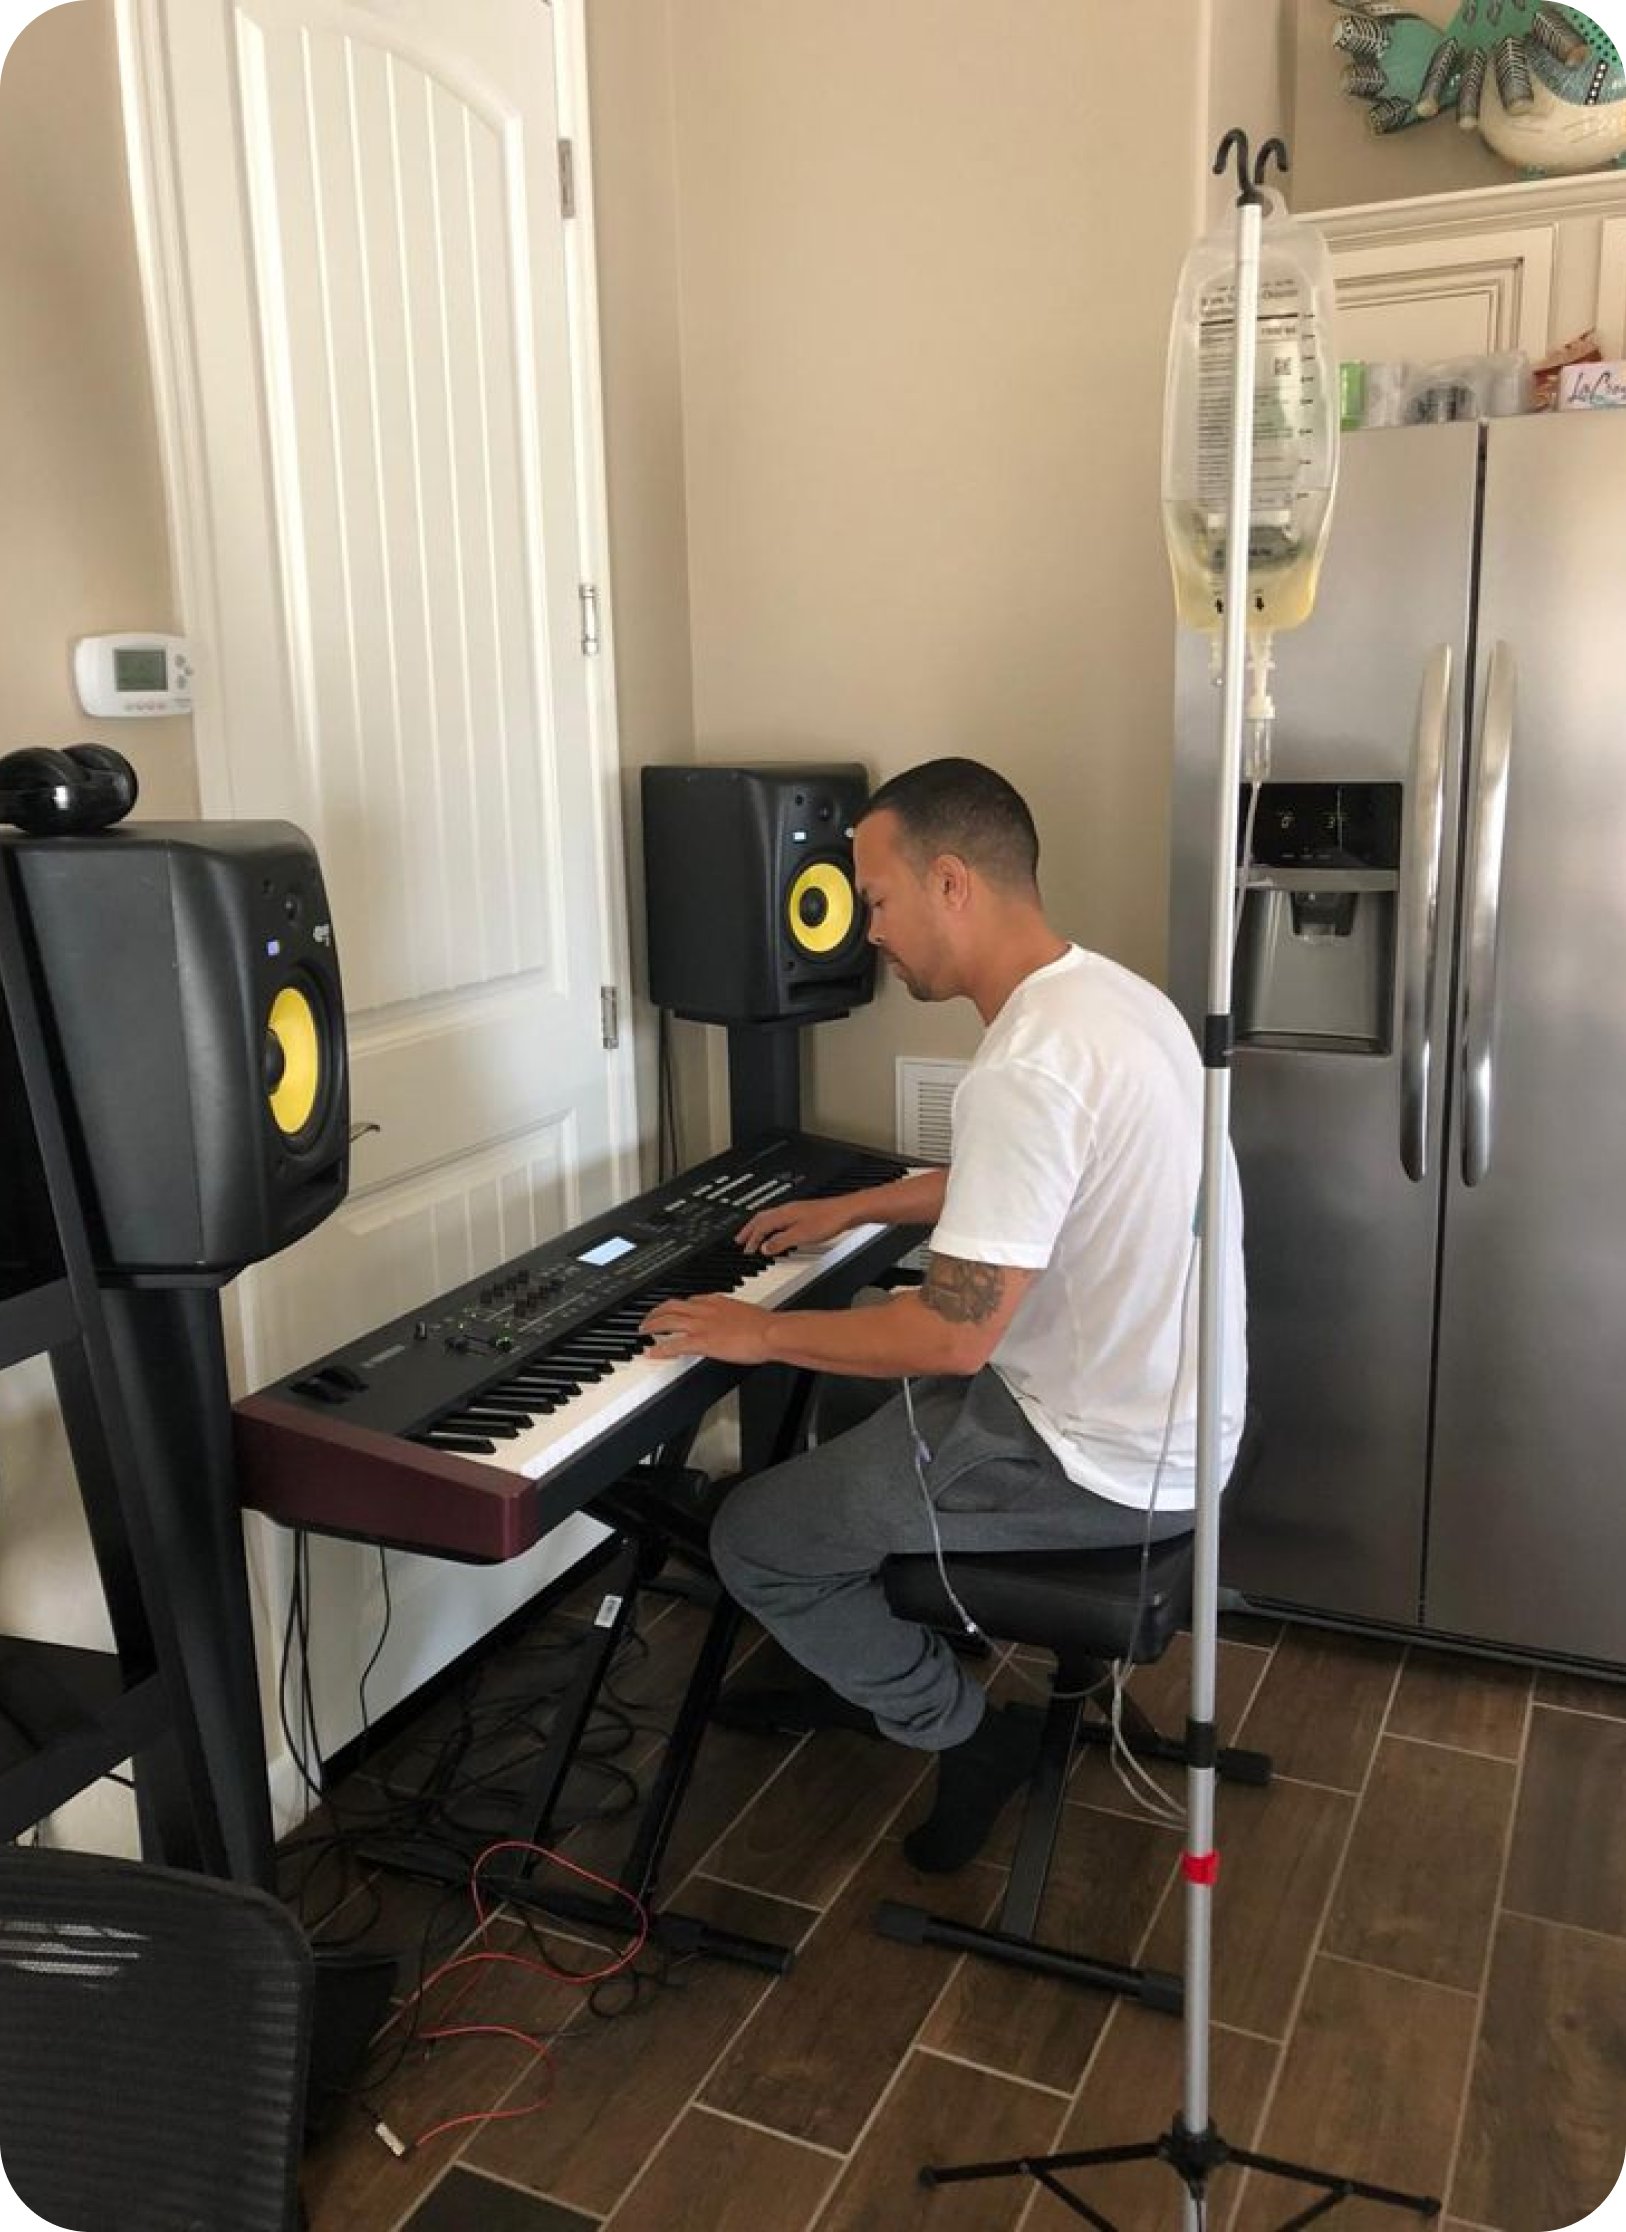 A man is sitting in a chair playing a keyboard in a kitchen.